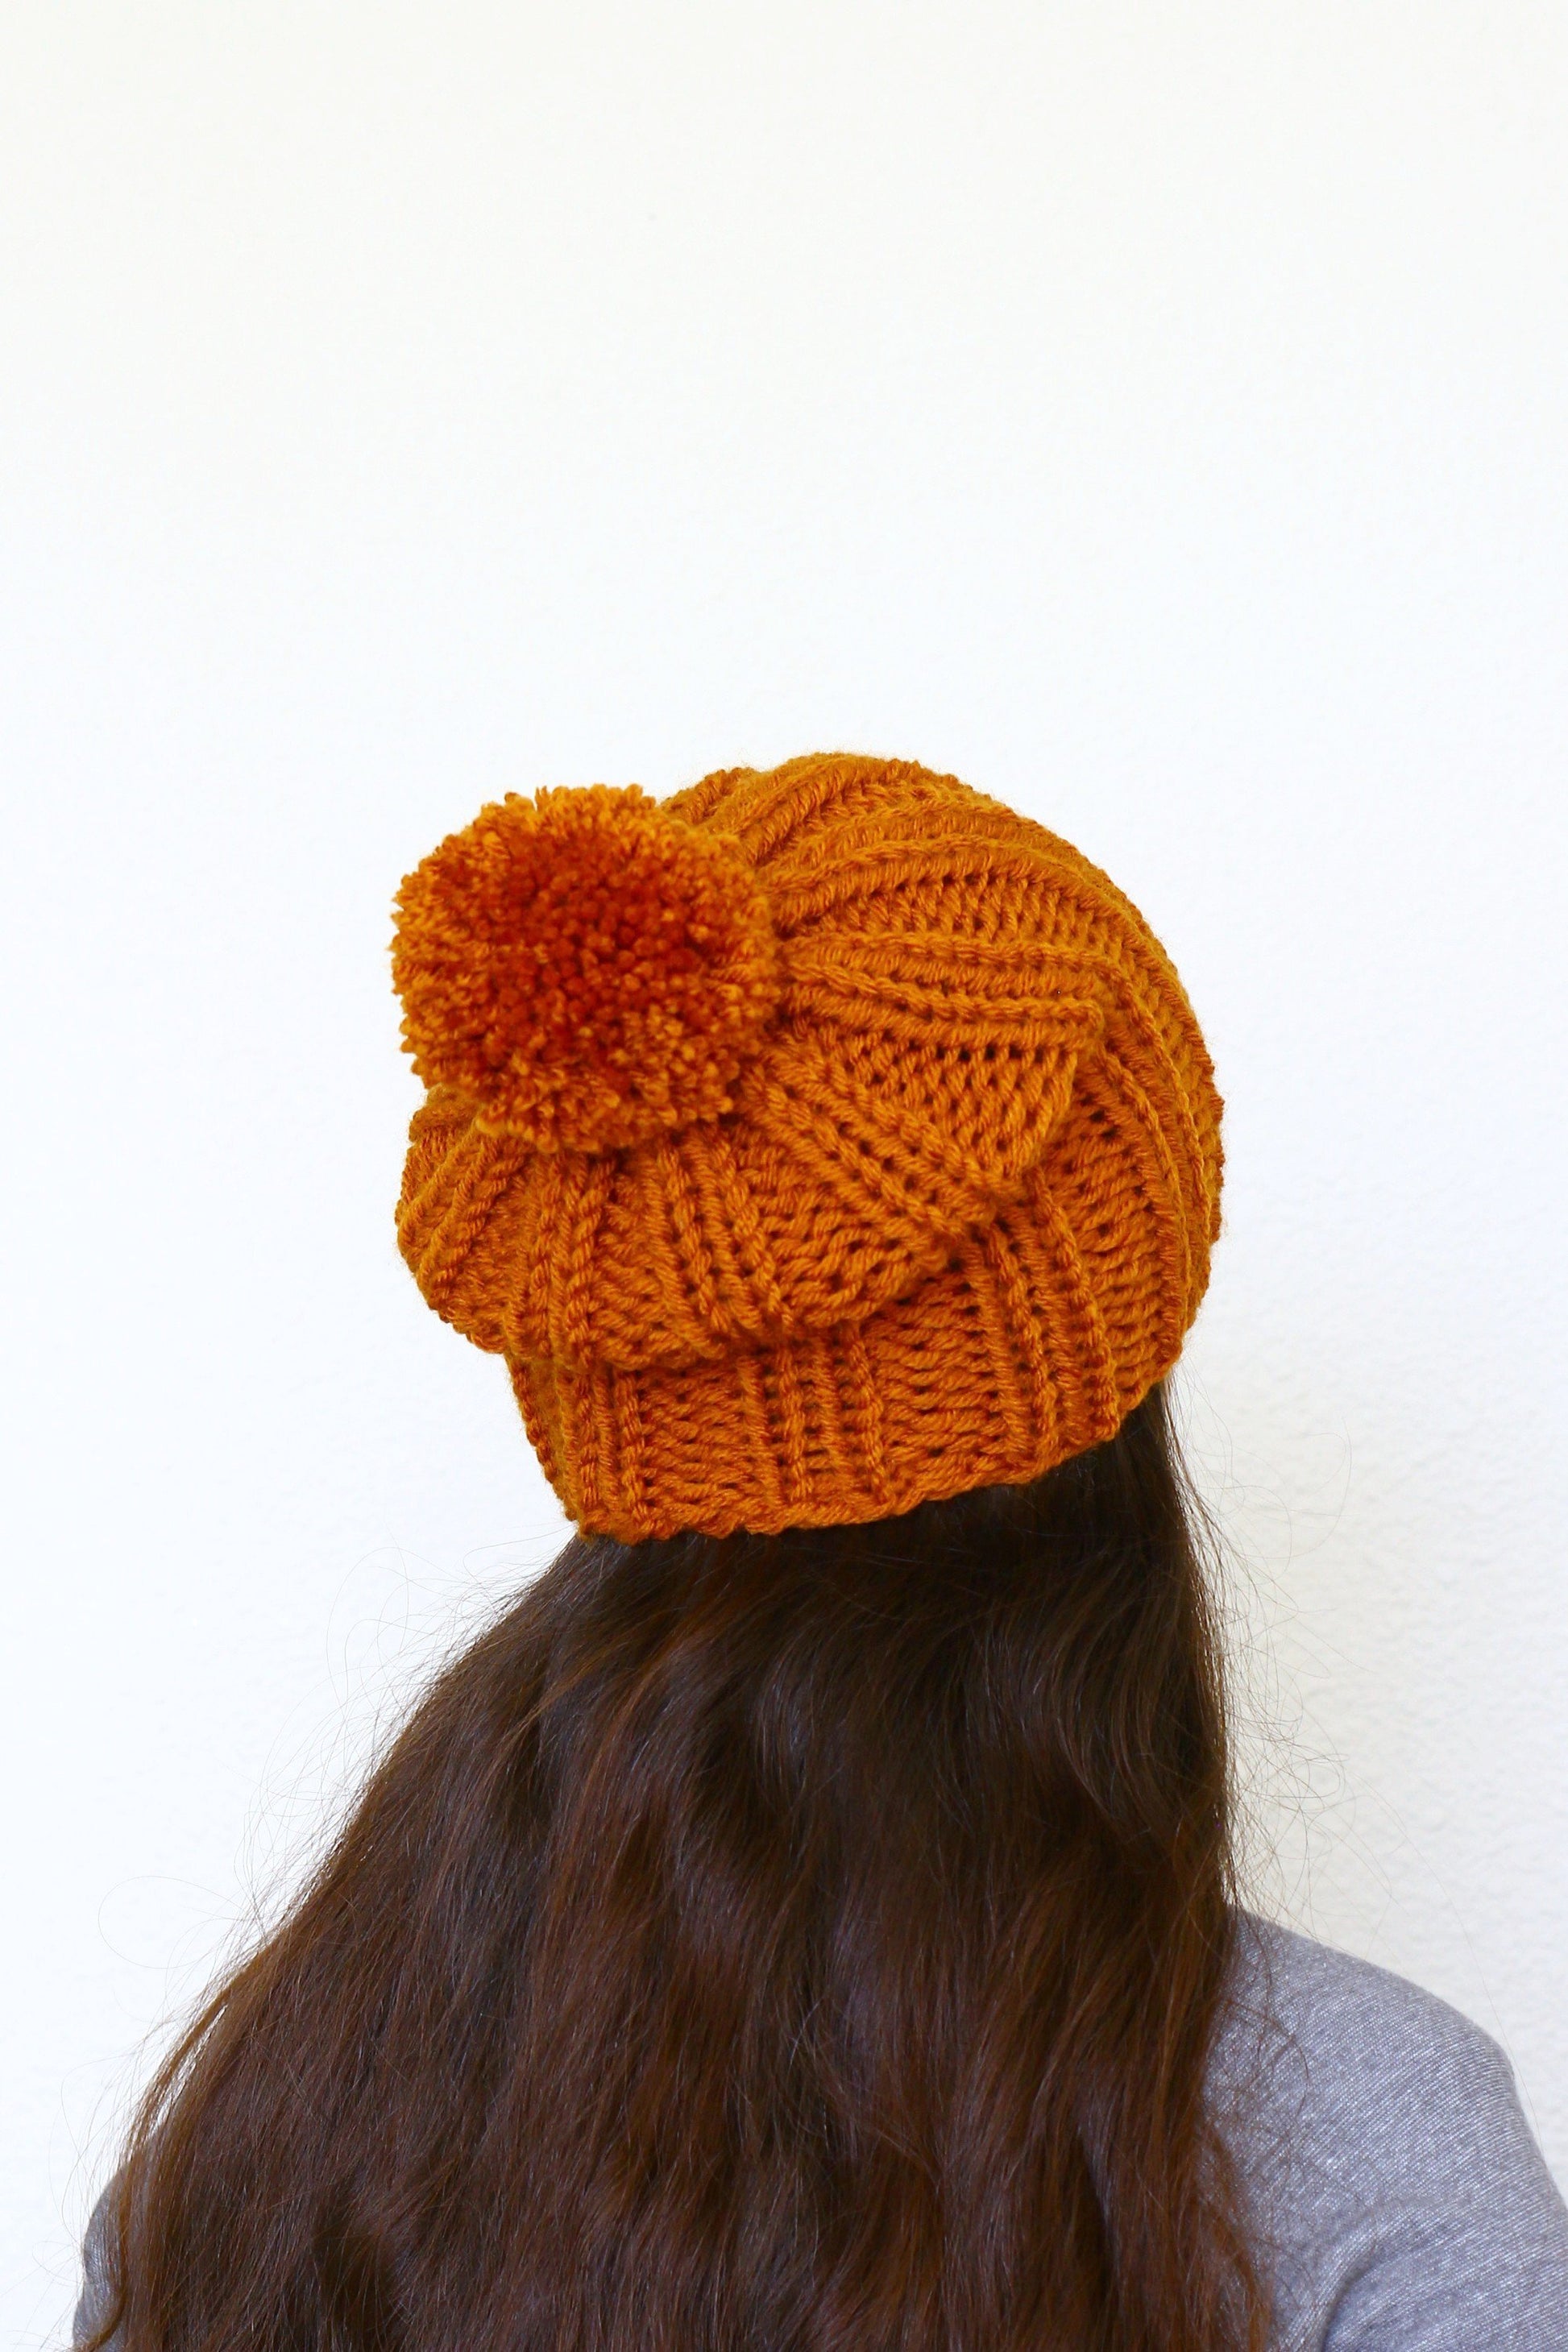 Knit beanie hat, slouchy hat in rust orange color